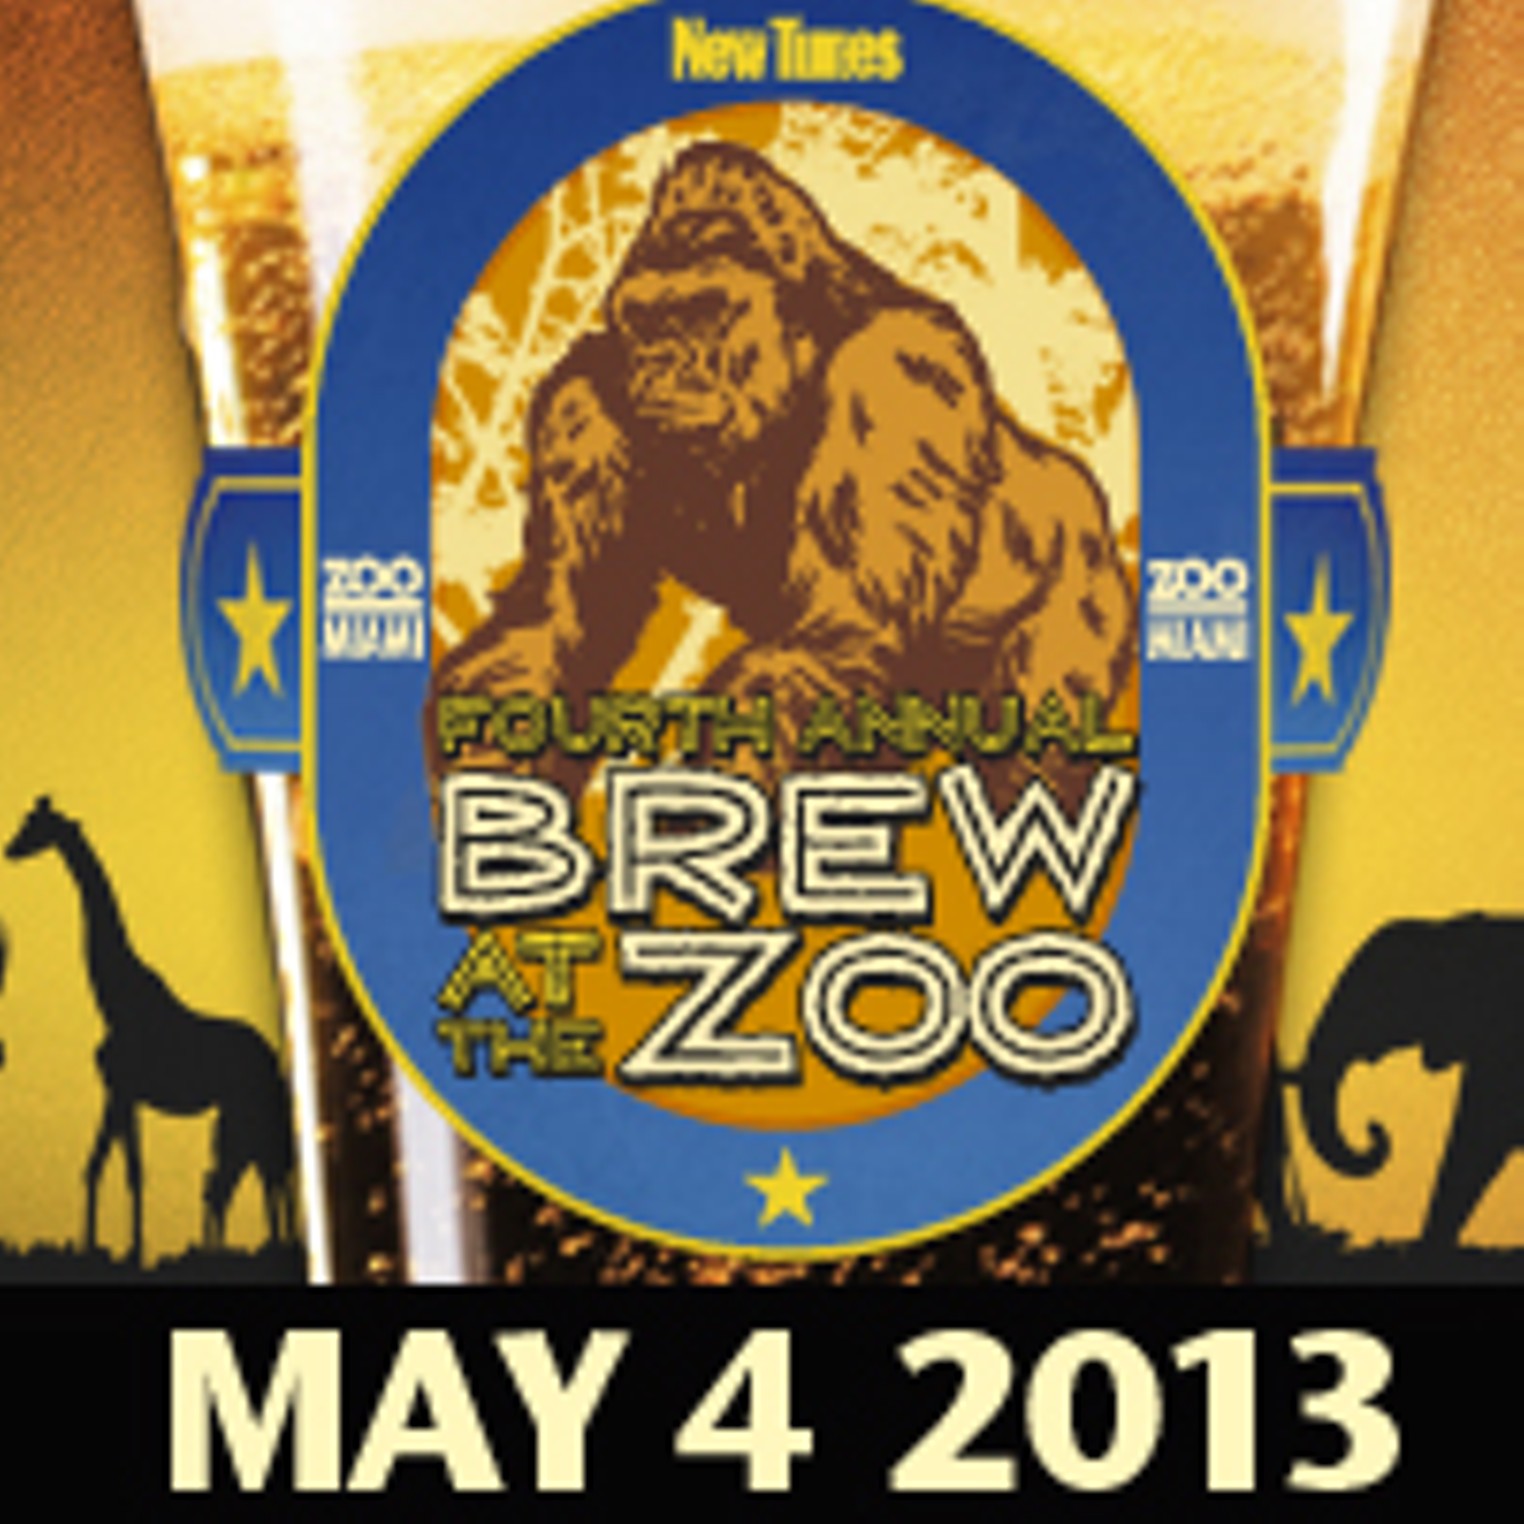 Brew at the Zoo Miami Miami New Times The Leading Independent